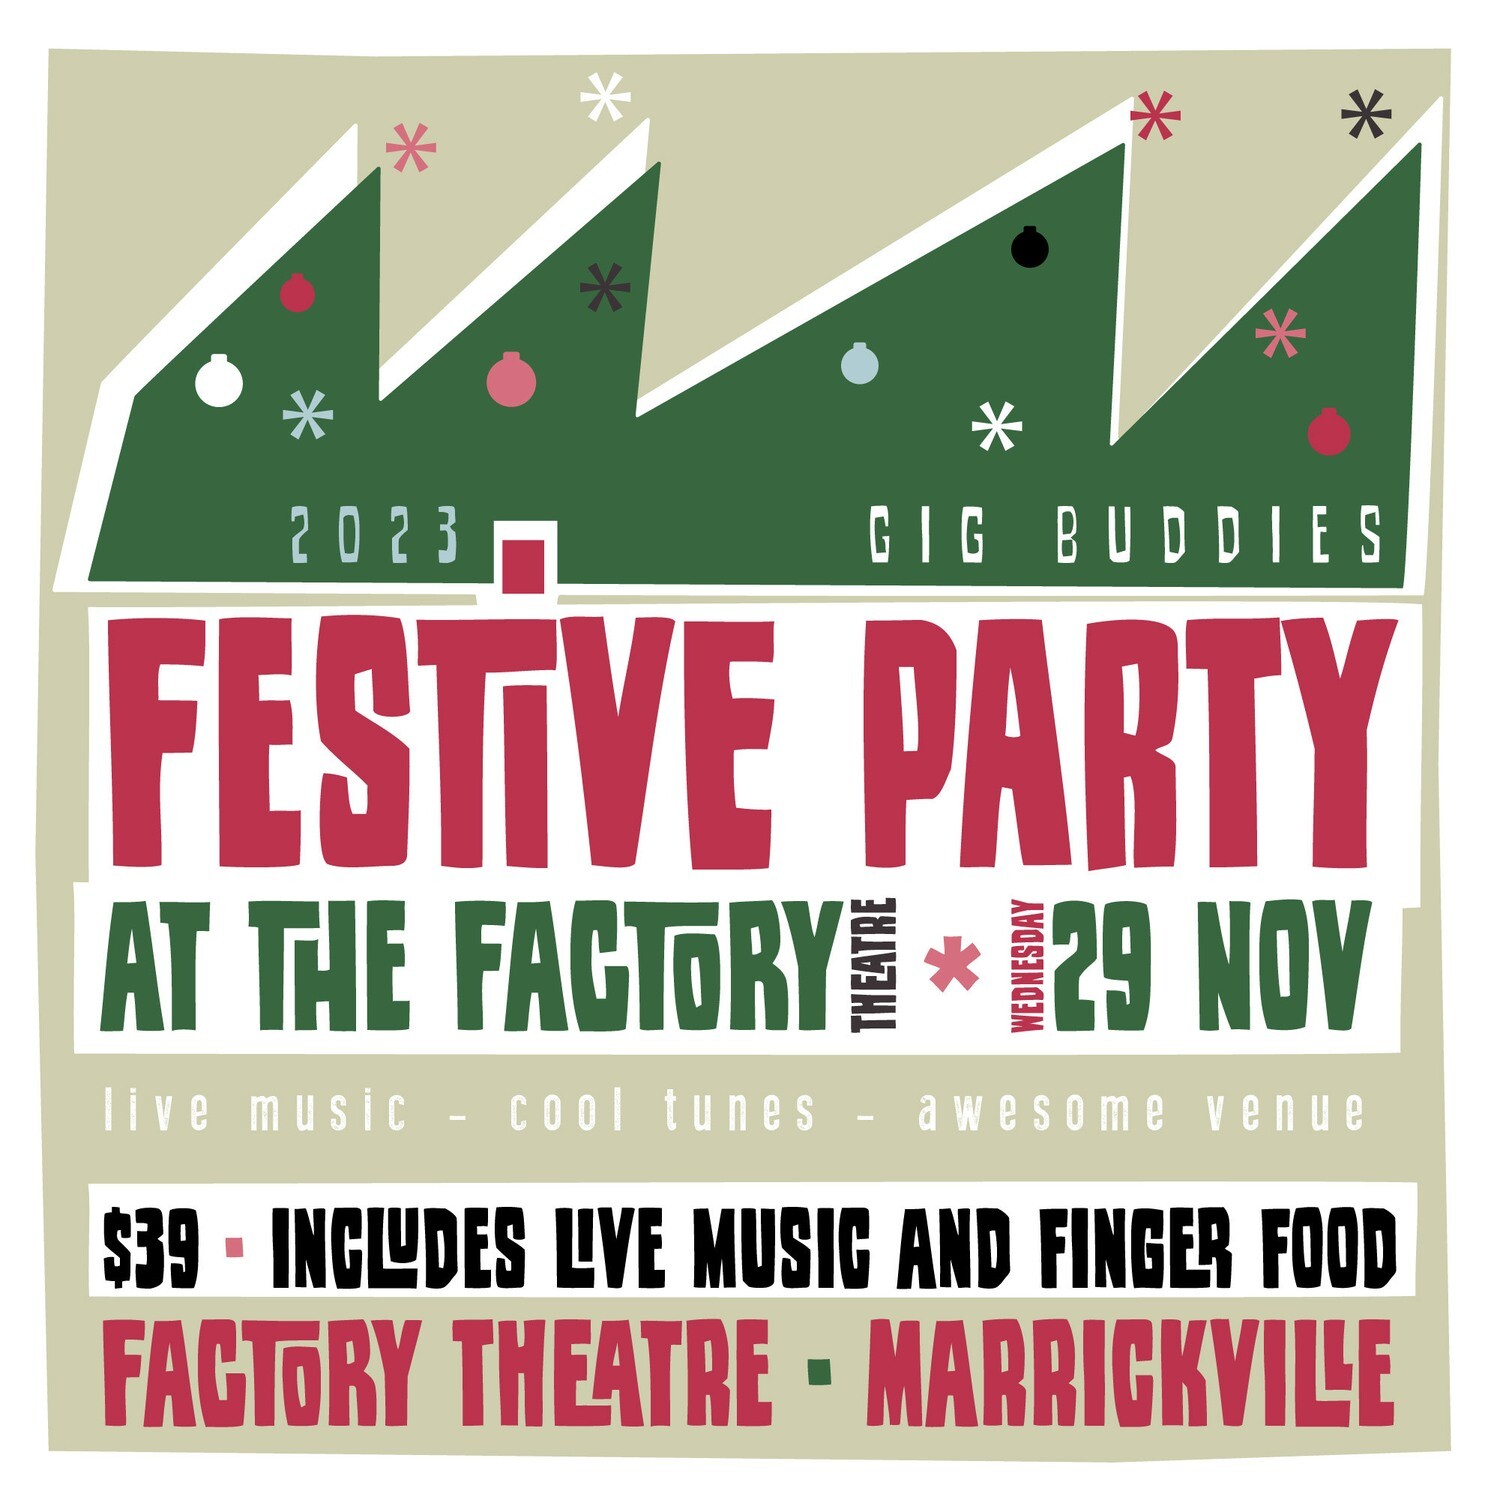 Gig Buddies festive party @ Factory Theatre, Marrickville - Wednesday 29 November